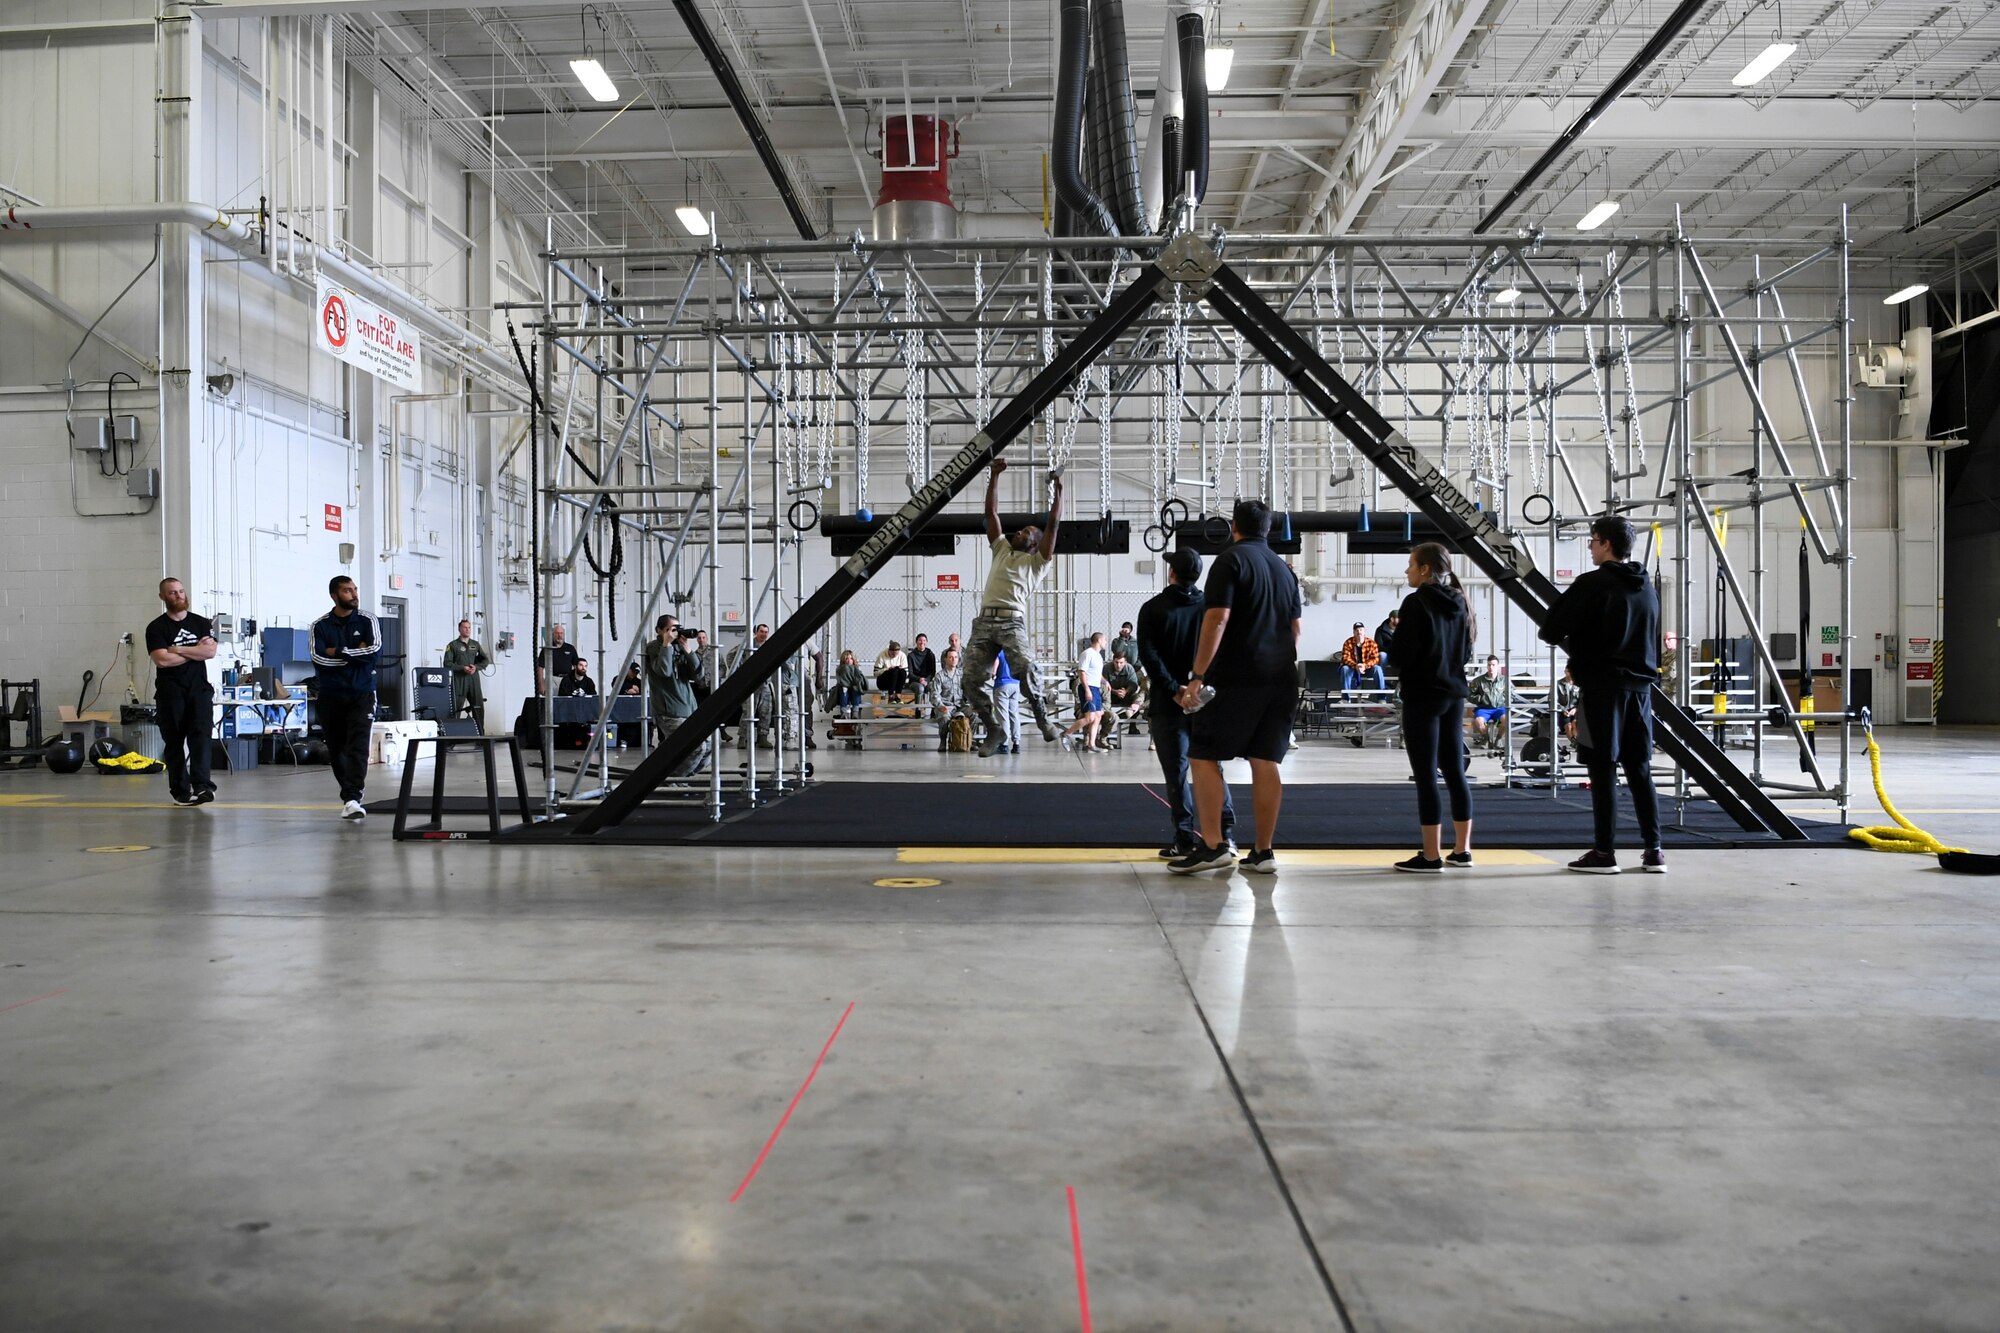 An Airman with the 911th Airlift Wing participates in a time challenge using the Alpha Warrior Battle Rig at the Pittsburgh International Airport Air Reserve Station, Pennsylvania, October 14, 2018. The battle rig is designed to meet all four of the Comprehensive Airman Fitness model's pillars: mental, physical, social and spiritual. (U.S. Air Force photo by Staff Sgt. Zachary Vucic)